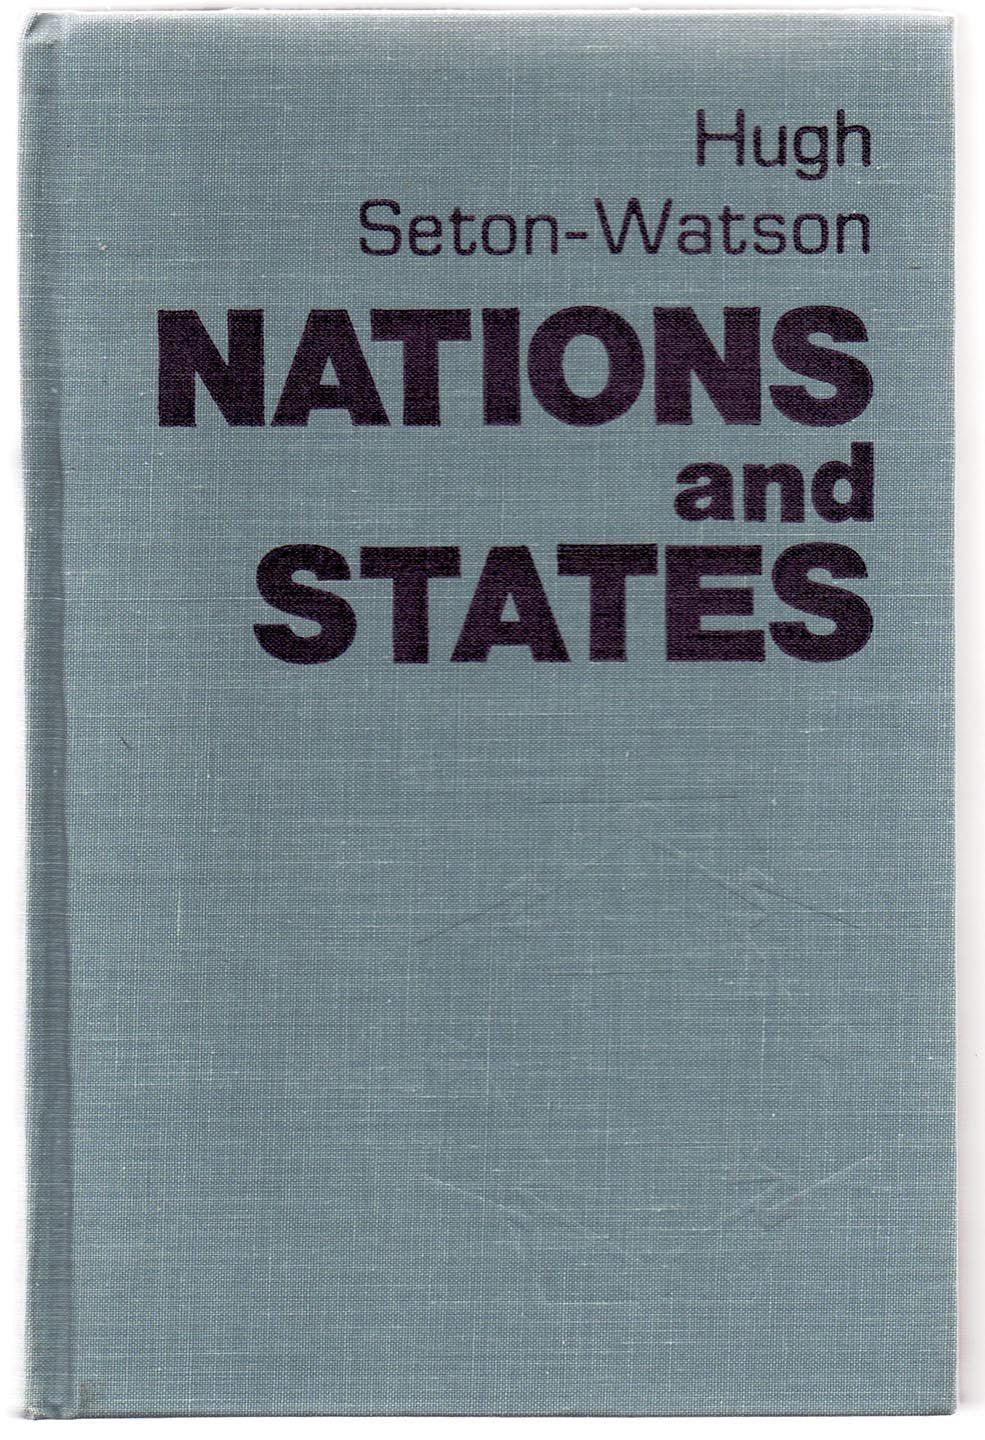 Nations and States: An Enquiry into the Origins of Nations and the Politics of Nationalism